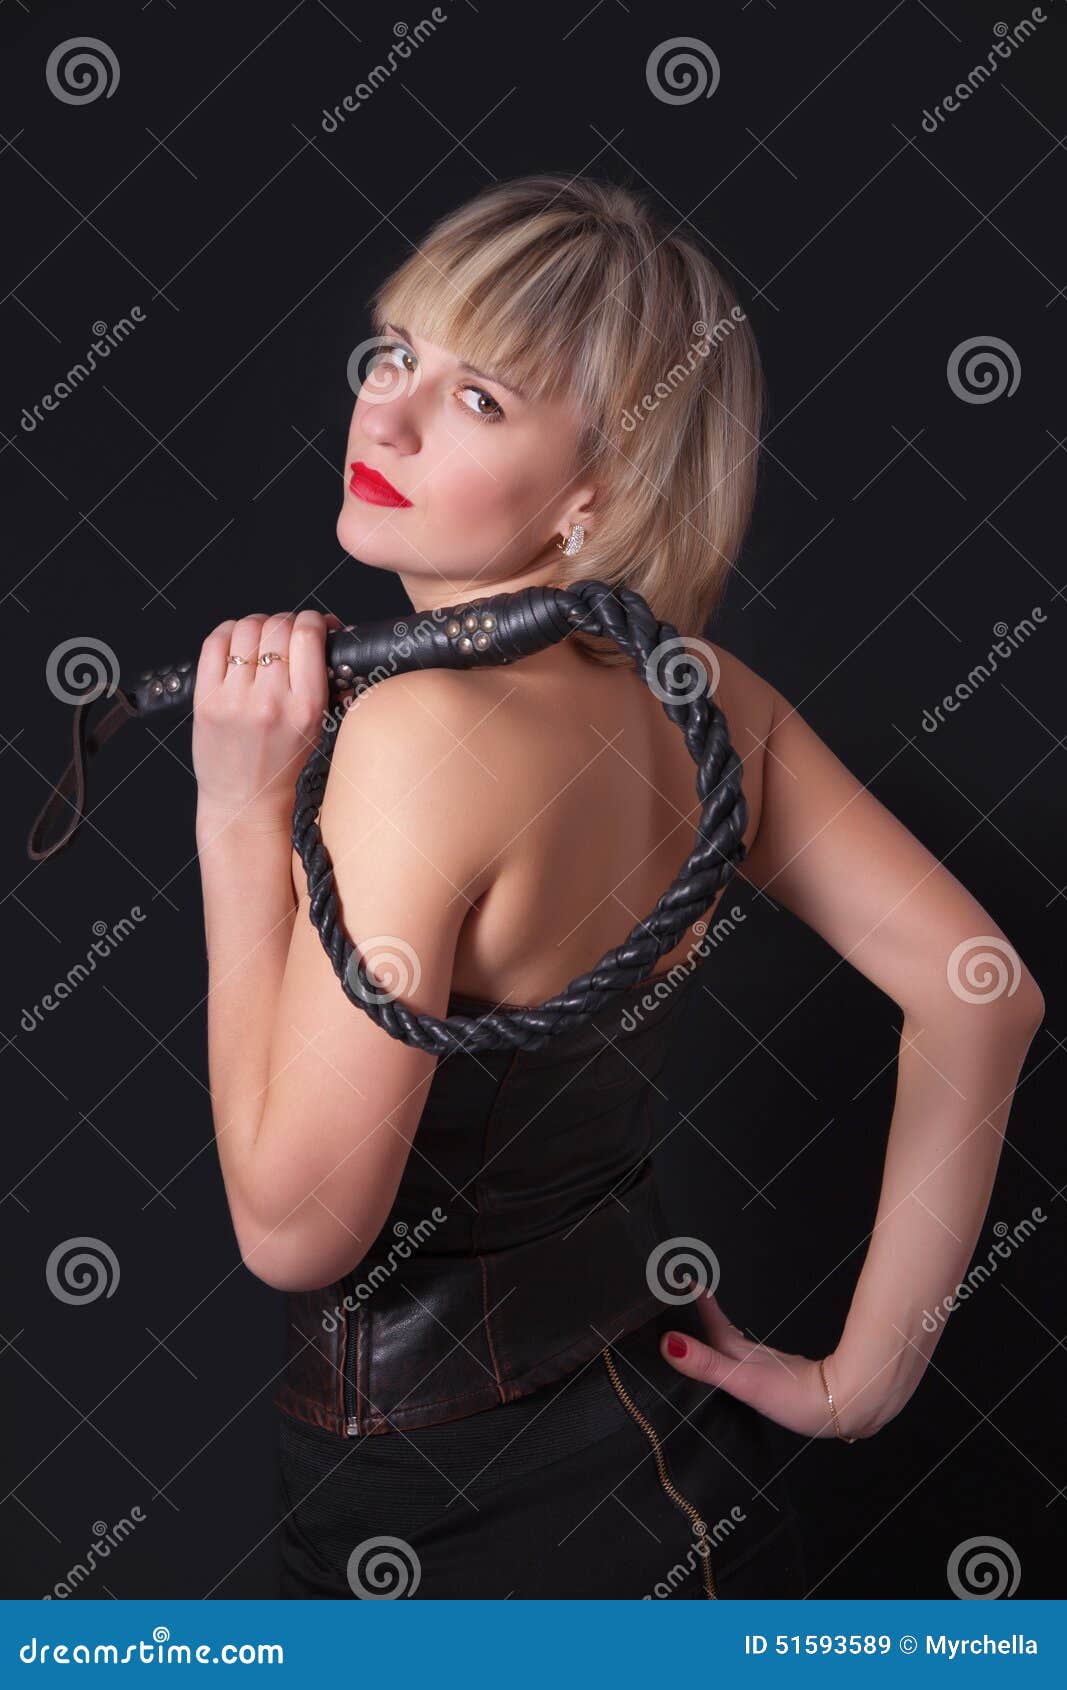 Woman with a Whip in Her Hand Stock Image - Image of fashionable